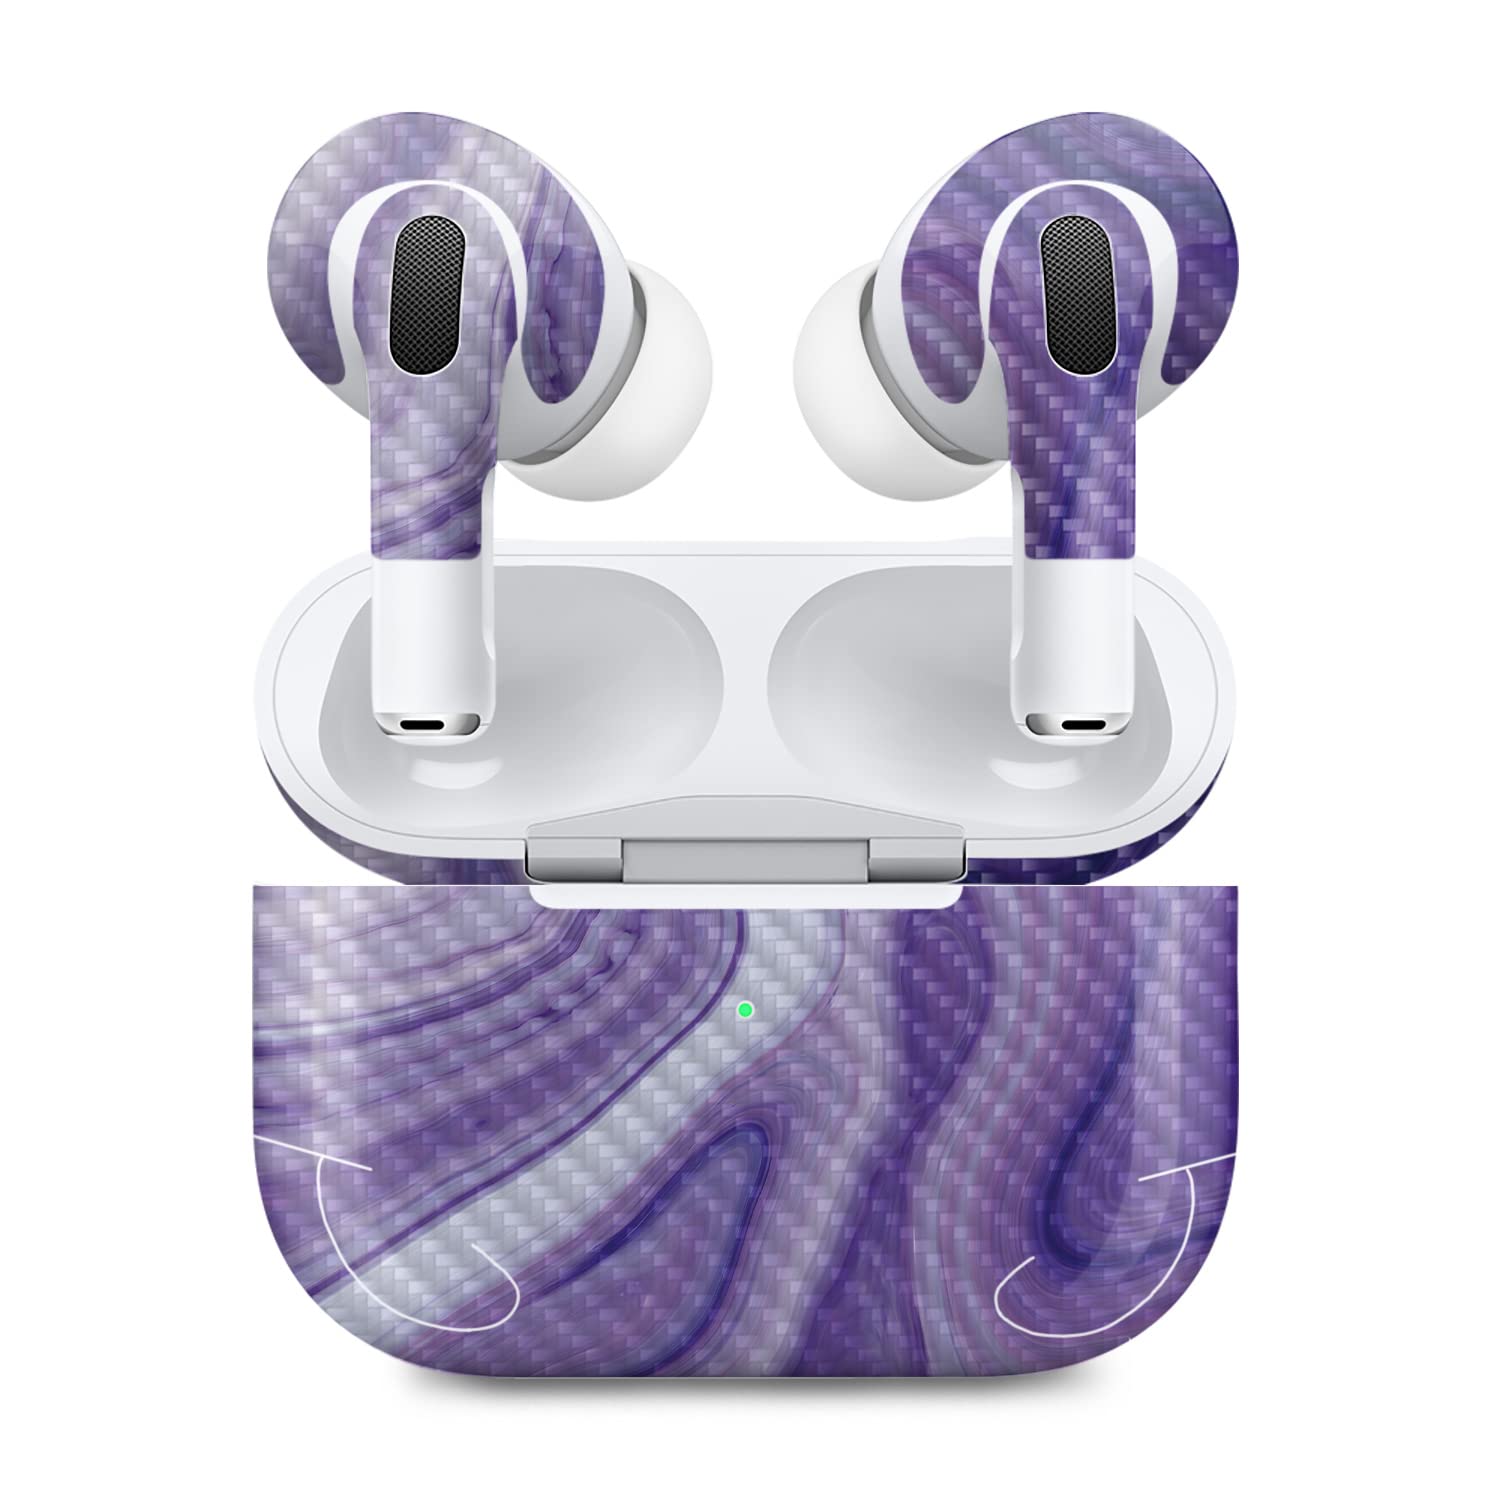 MightySkins Carbon Fiber (2 Pack) Skins Compatible with Apple AirPods Pro 2 - Lavendar Acrylic | Protective, Durable Textured Carbon Fiber Finish | Easy to Apply and Change Styles | Made in The USA